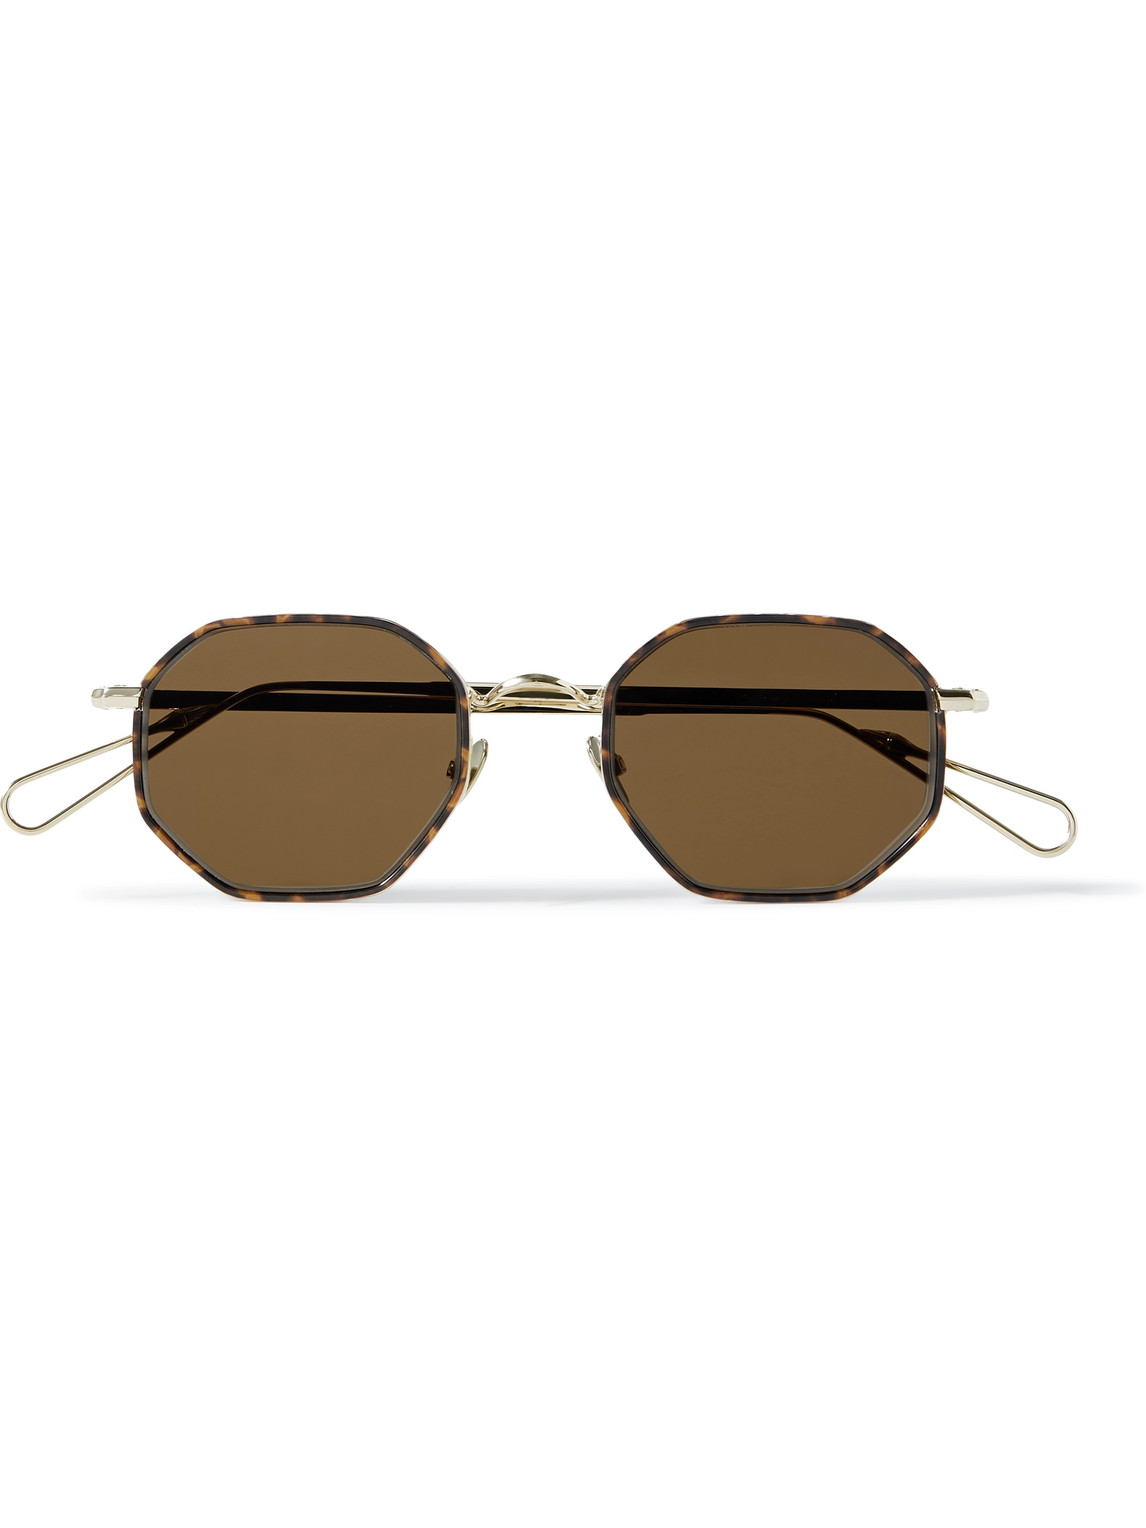 Ahlem Luxembourg Octagon-frame Tortoiseshell Acetate And Gold-tone Sunglasses In Brown